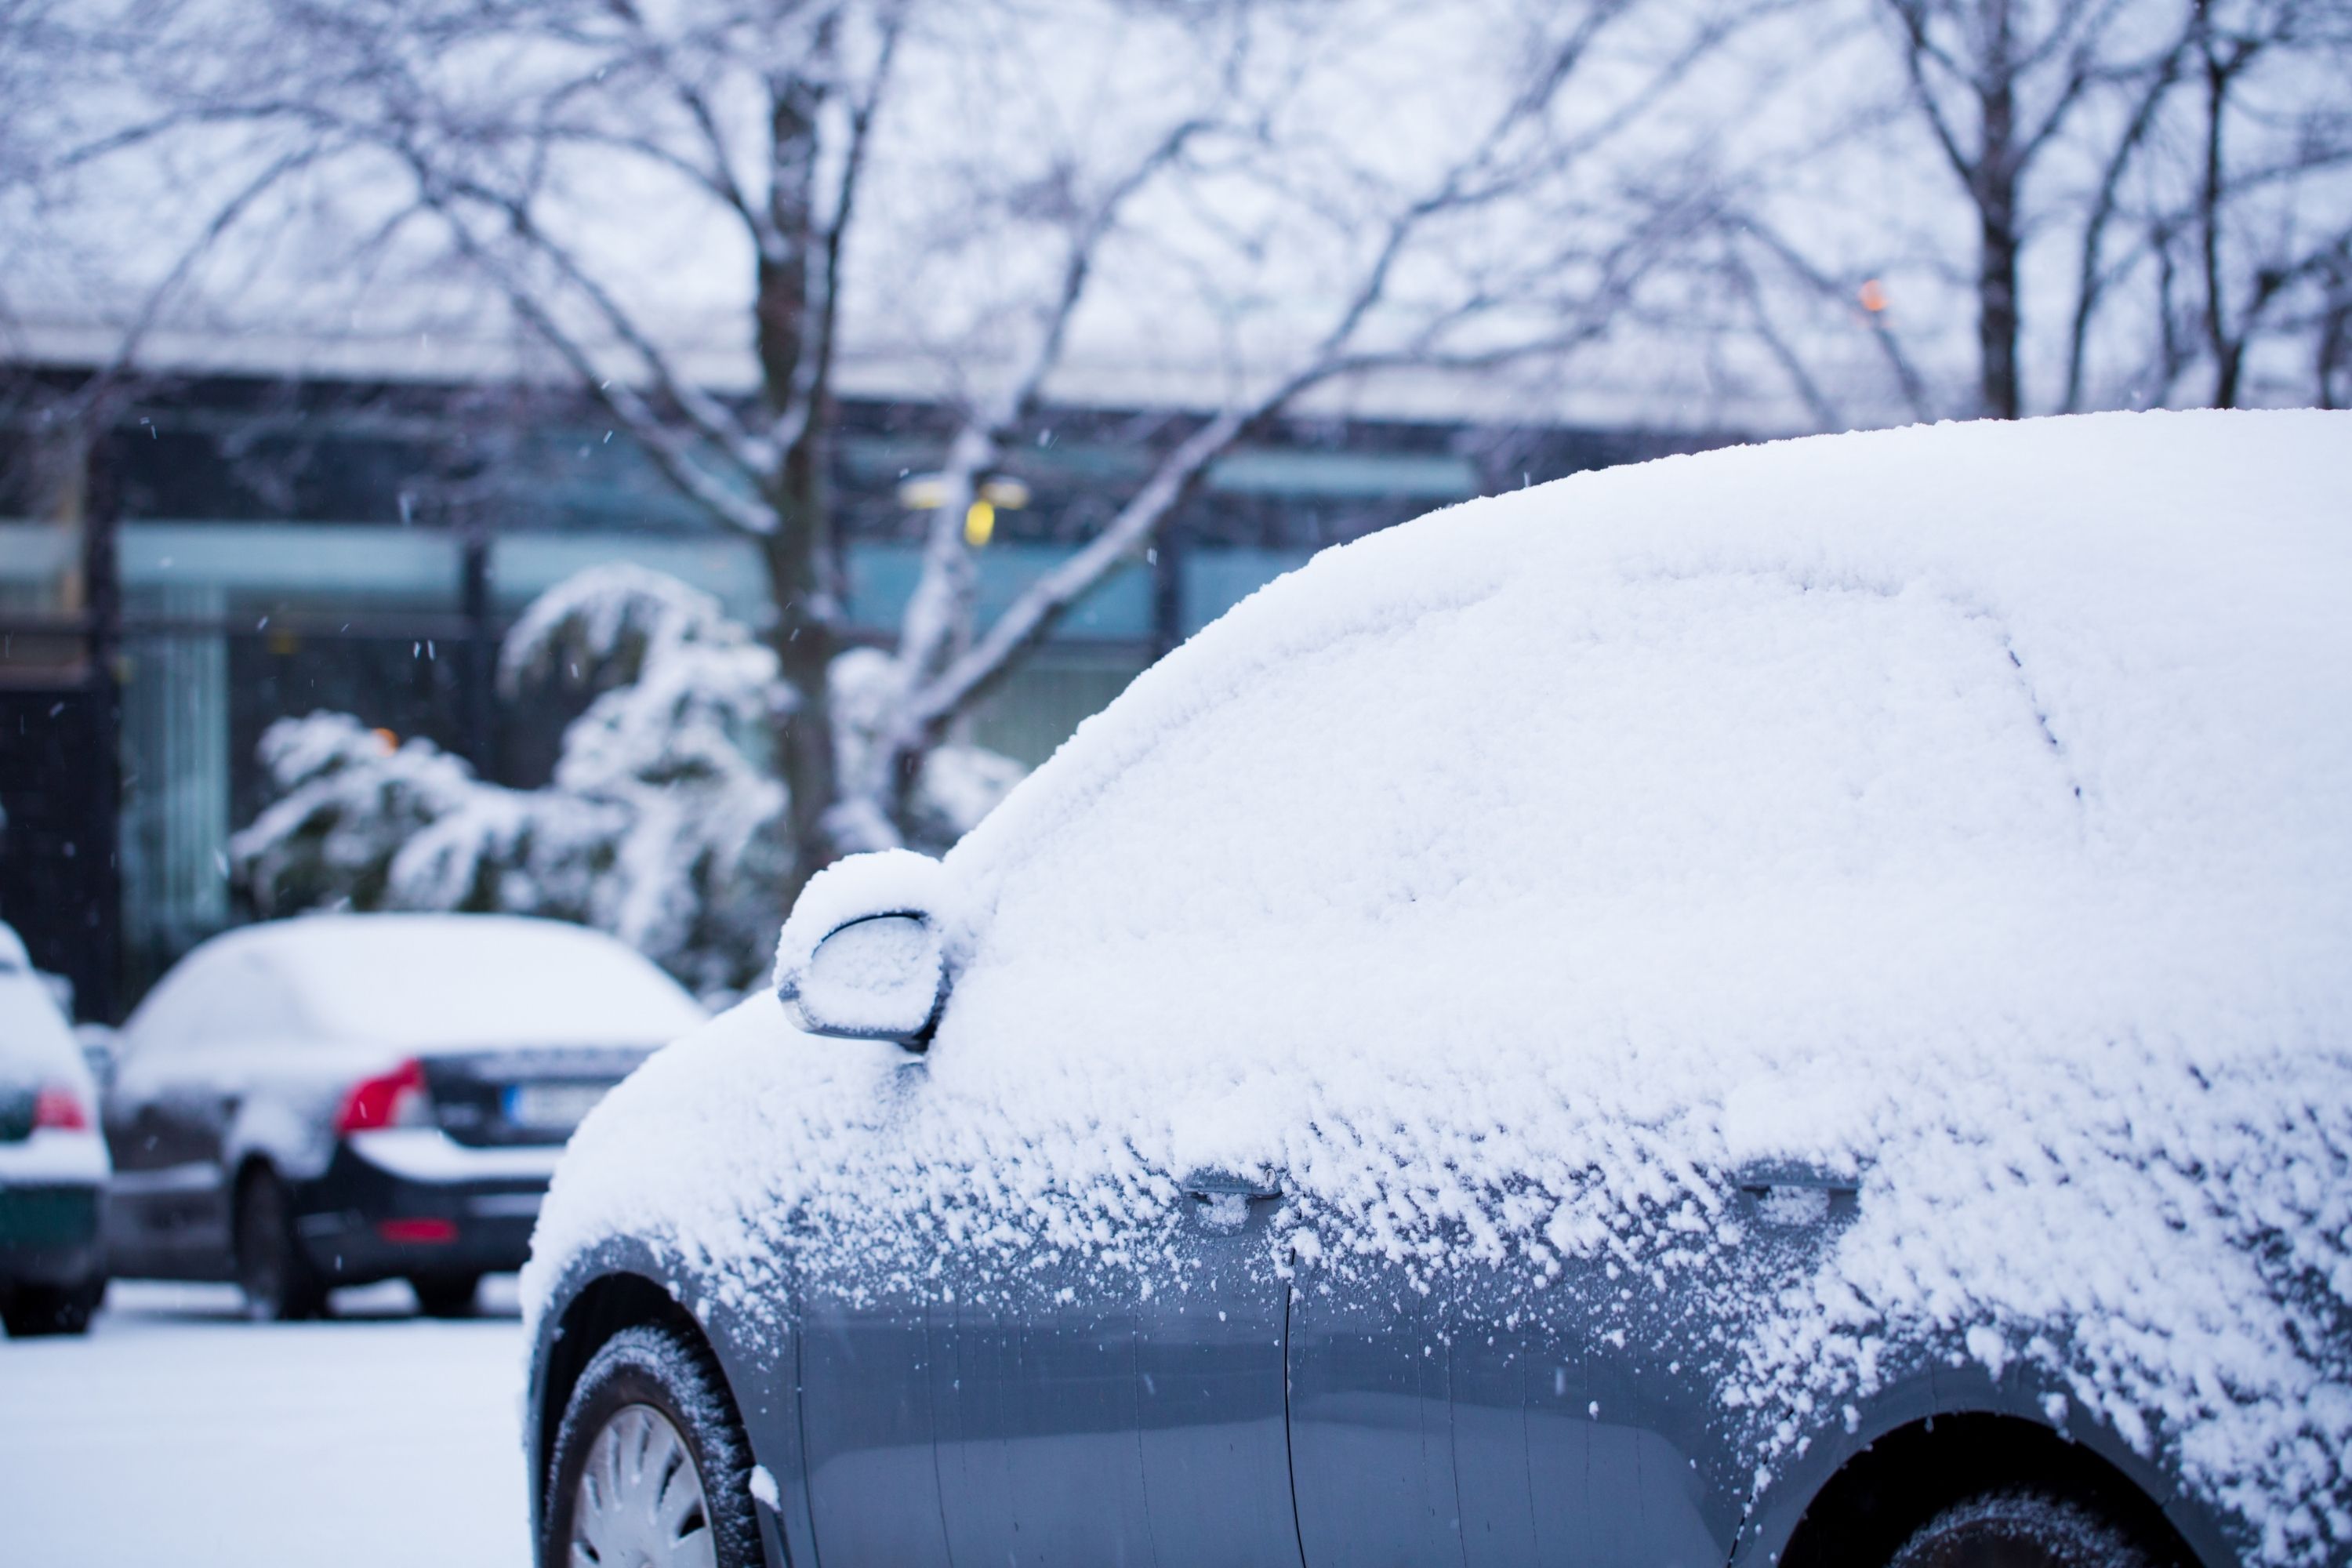 How to Clean Snow Off Your Car Without Scratching It